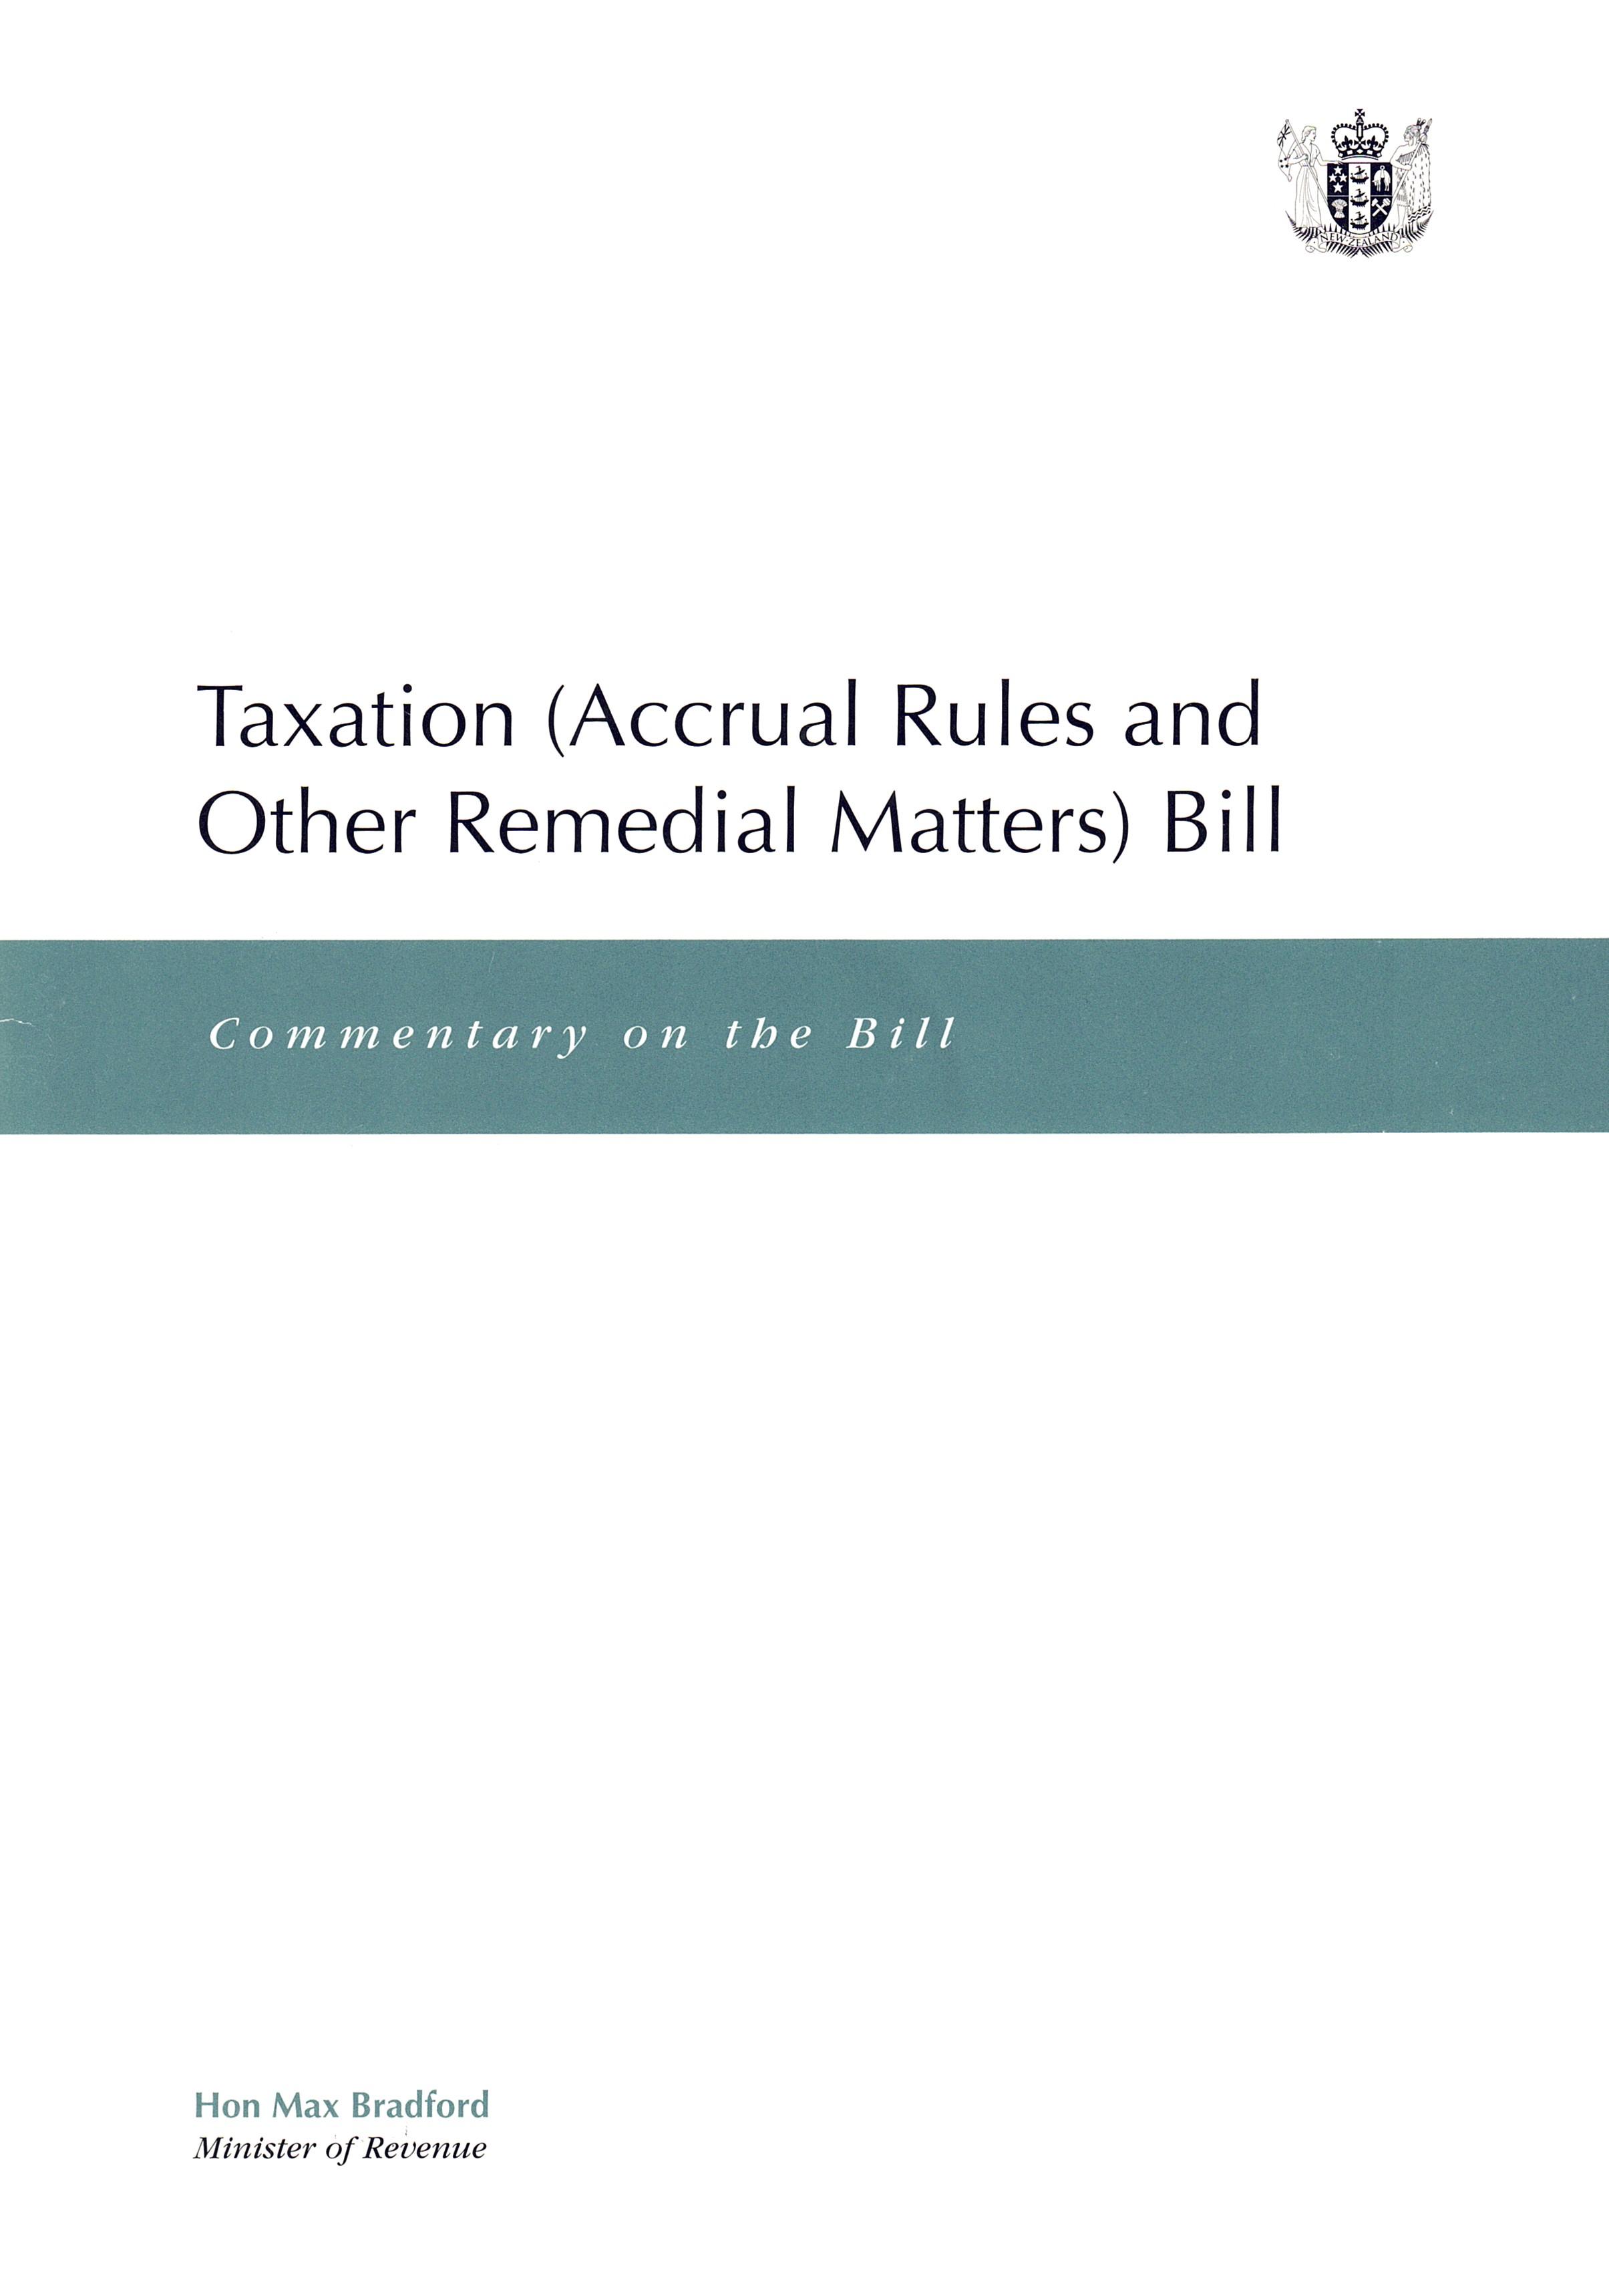 Publication cover image. Title = Taxation (Accrual Rules and Other Remedial Matters) Bill - Commentary on the bill. November 1998.